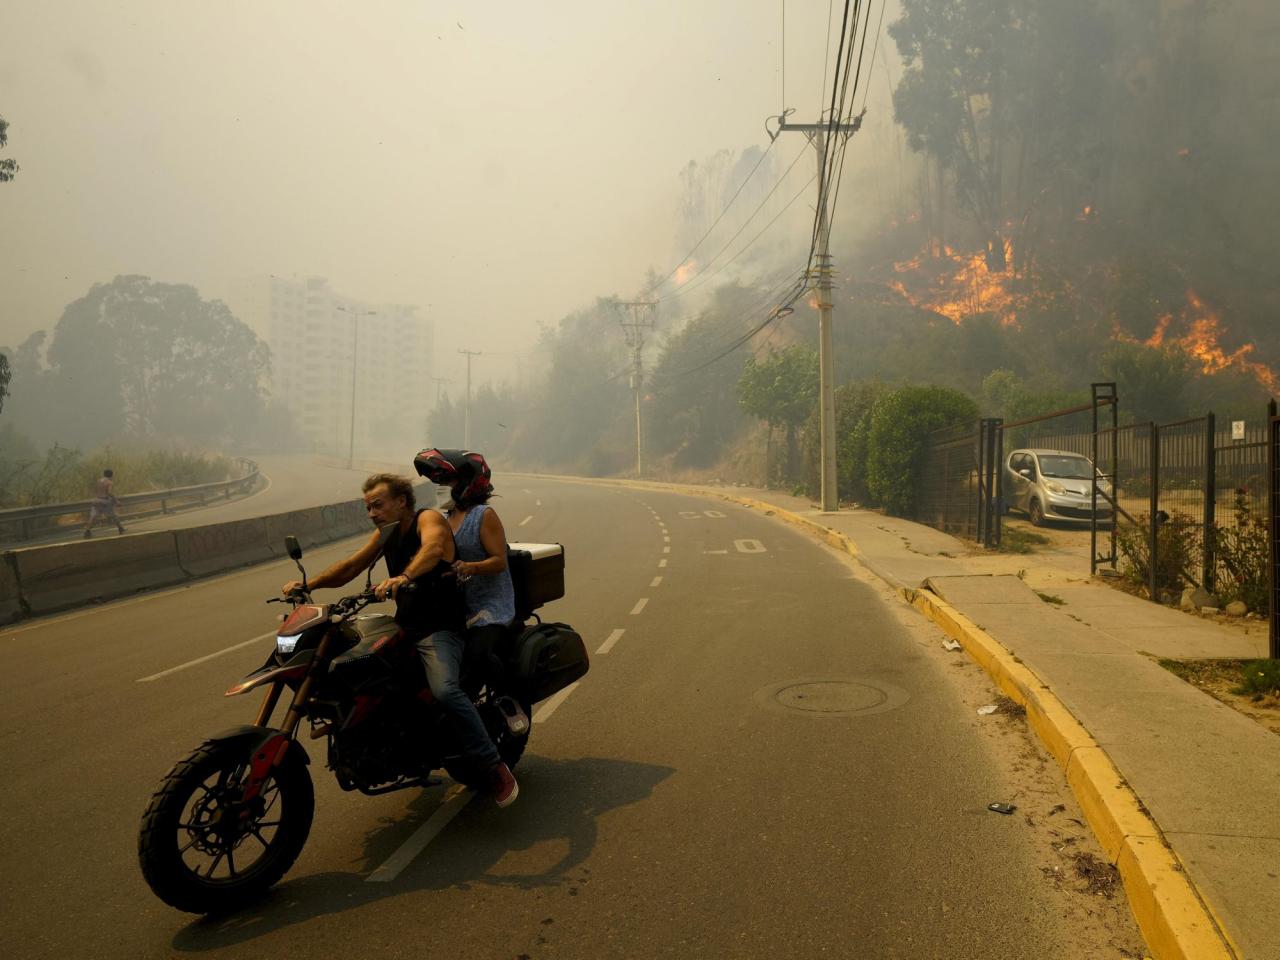 Climate change is a contributing factor to wildfires, such as those seen in Chile.